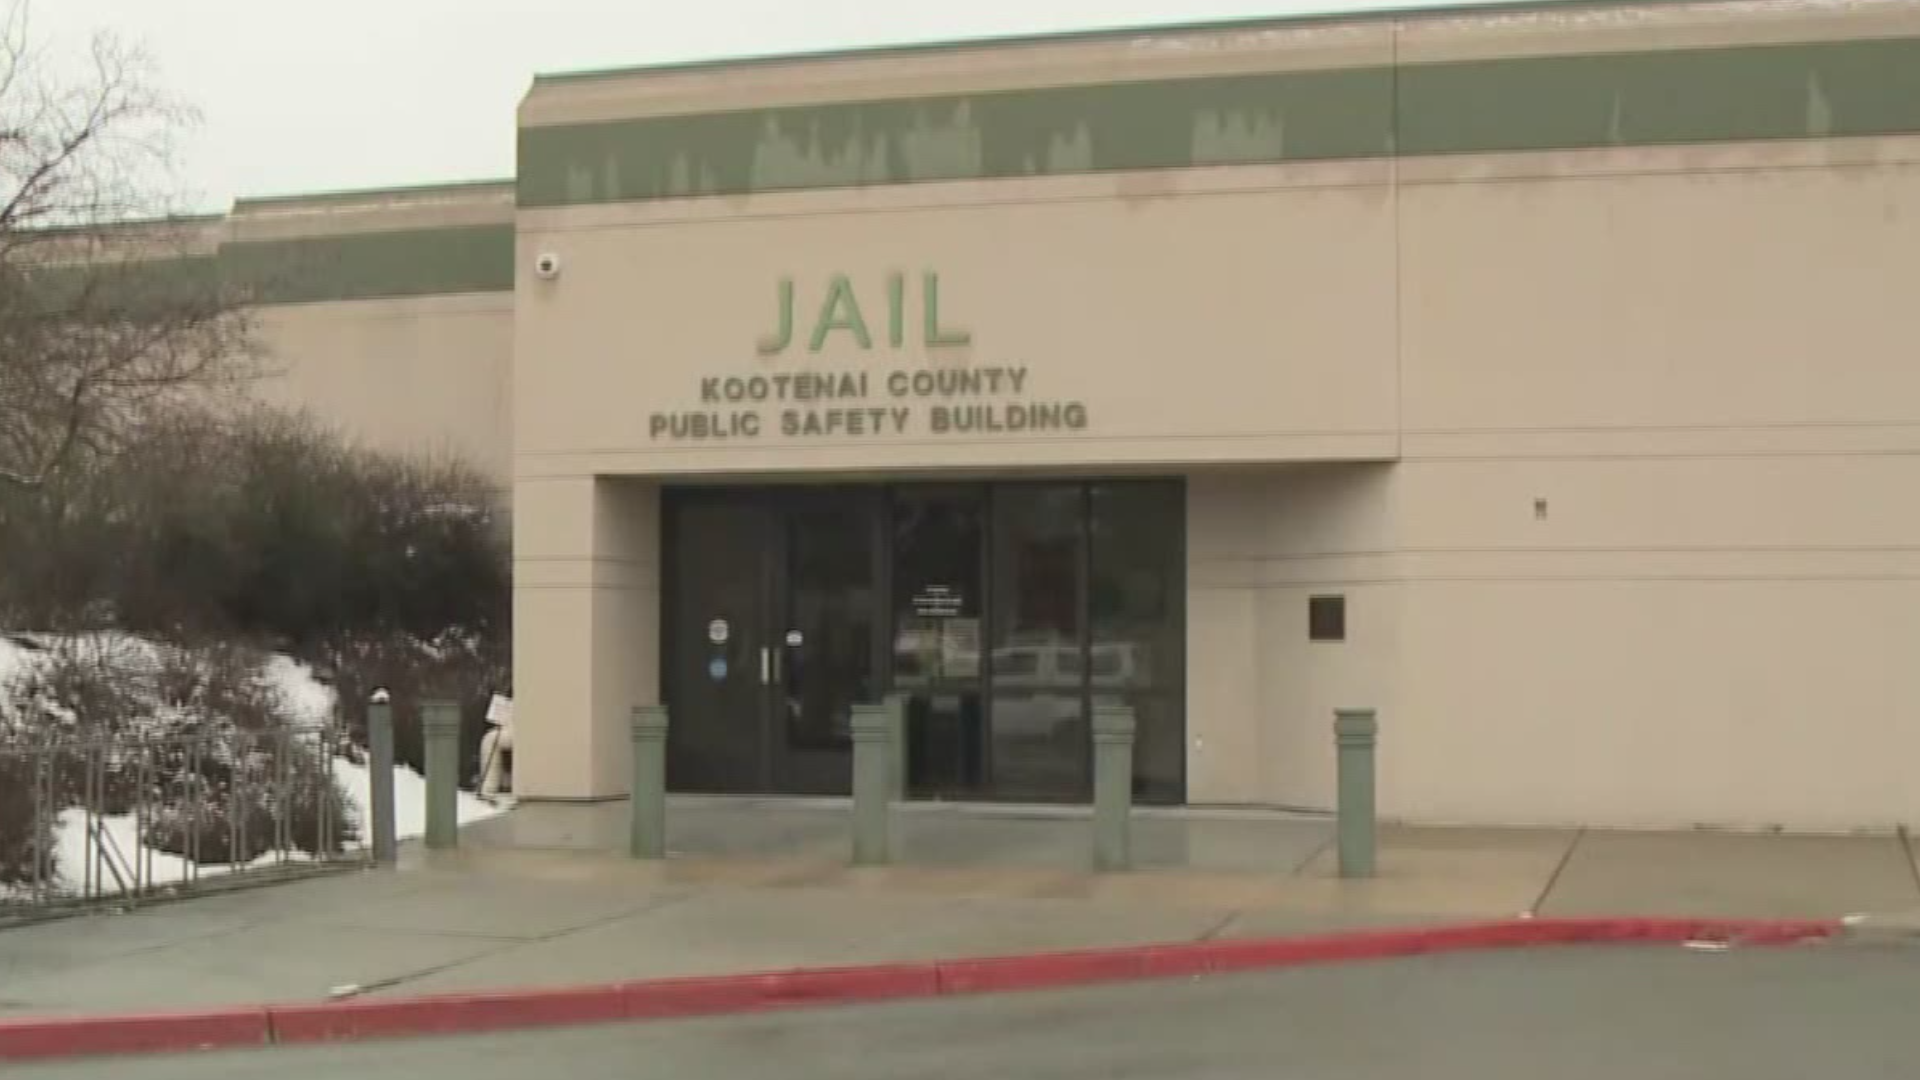 Amid COVID-19 concerns, authorities in Kootenai county say they're doing what they can to make sure coronavirus doesn't enter the jail there.